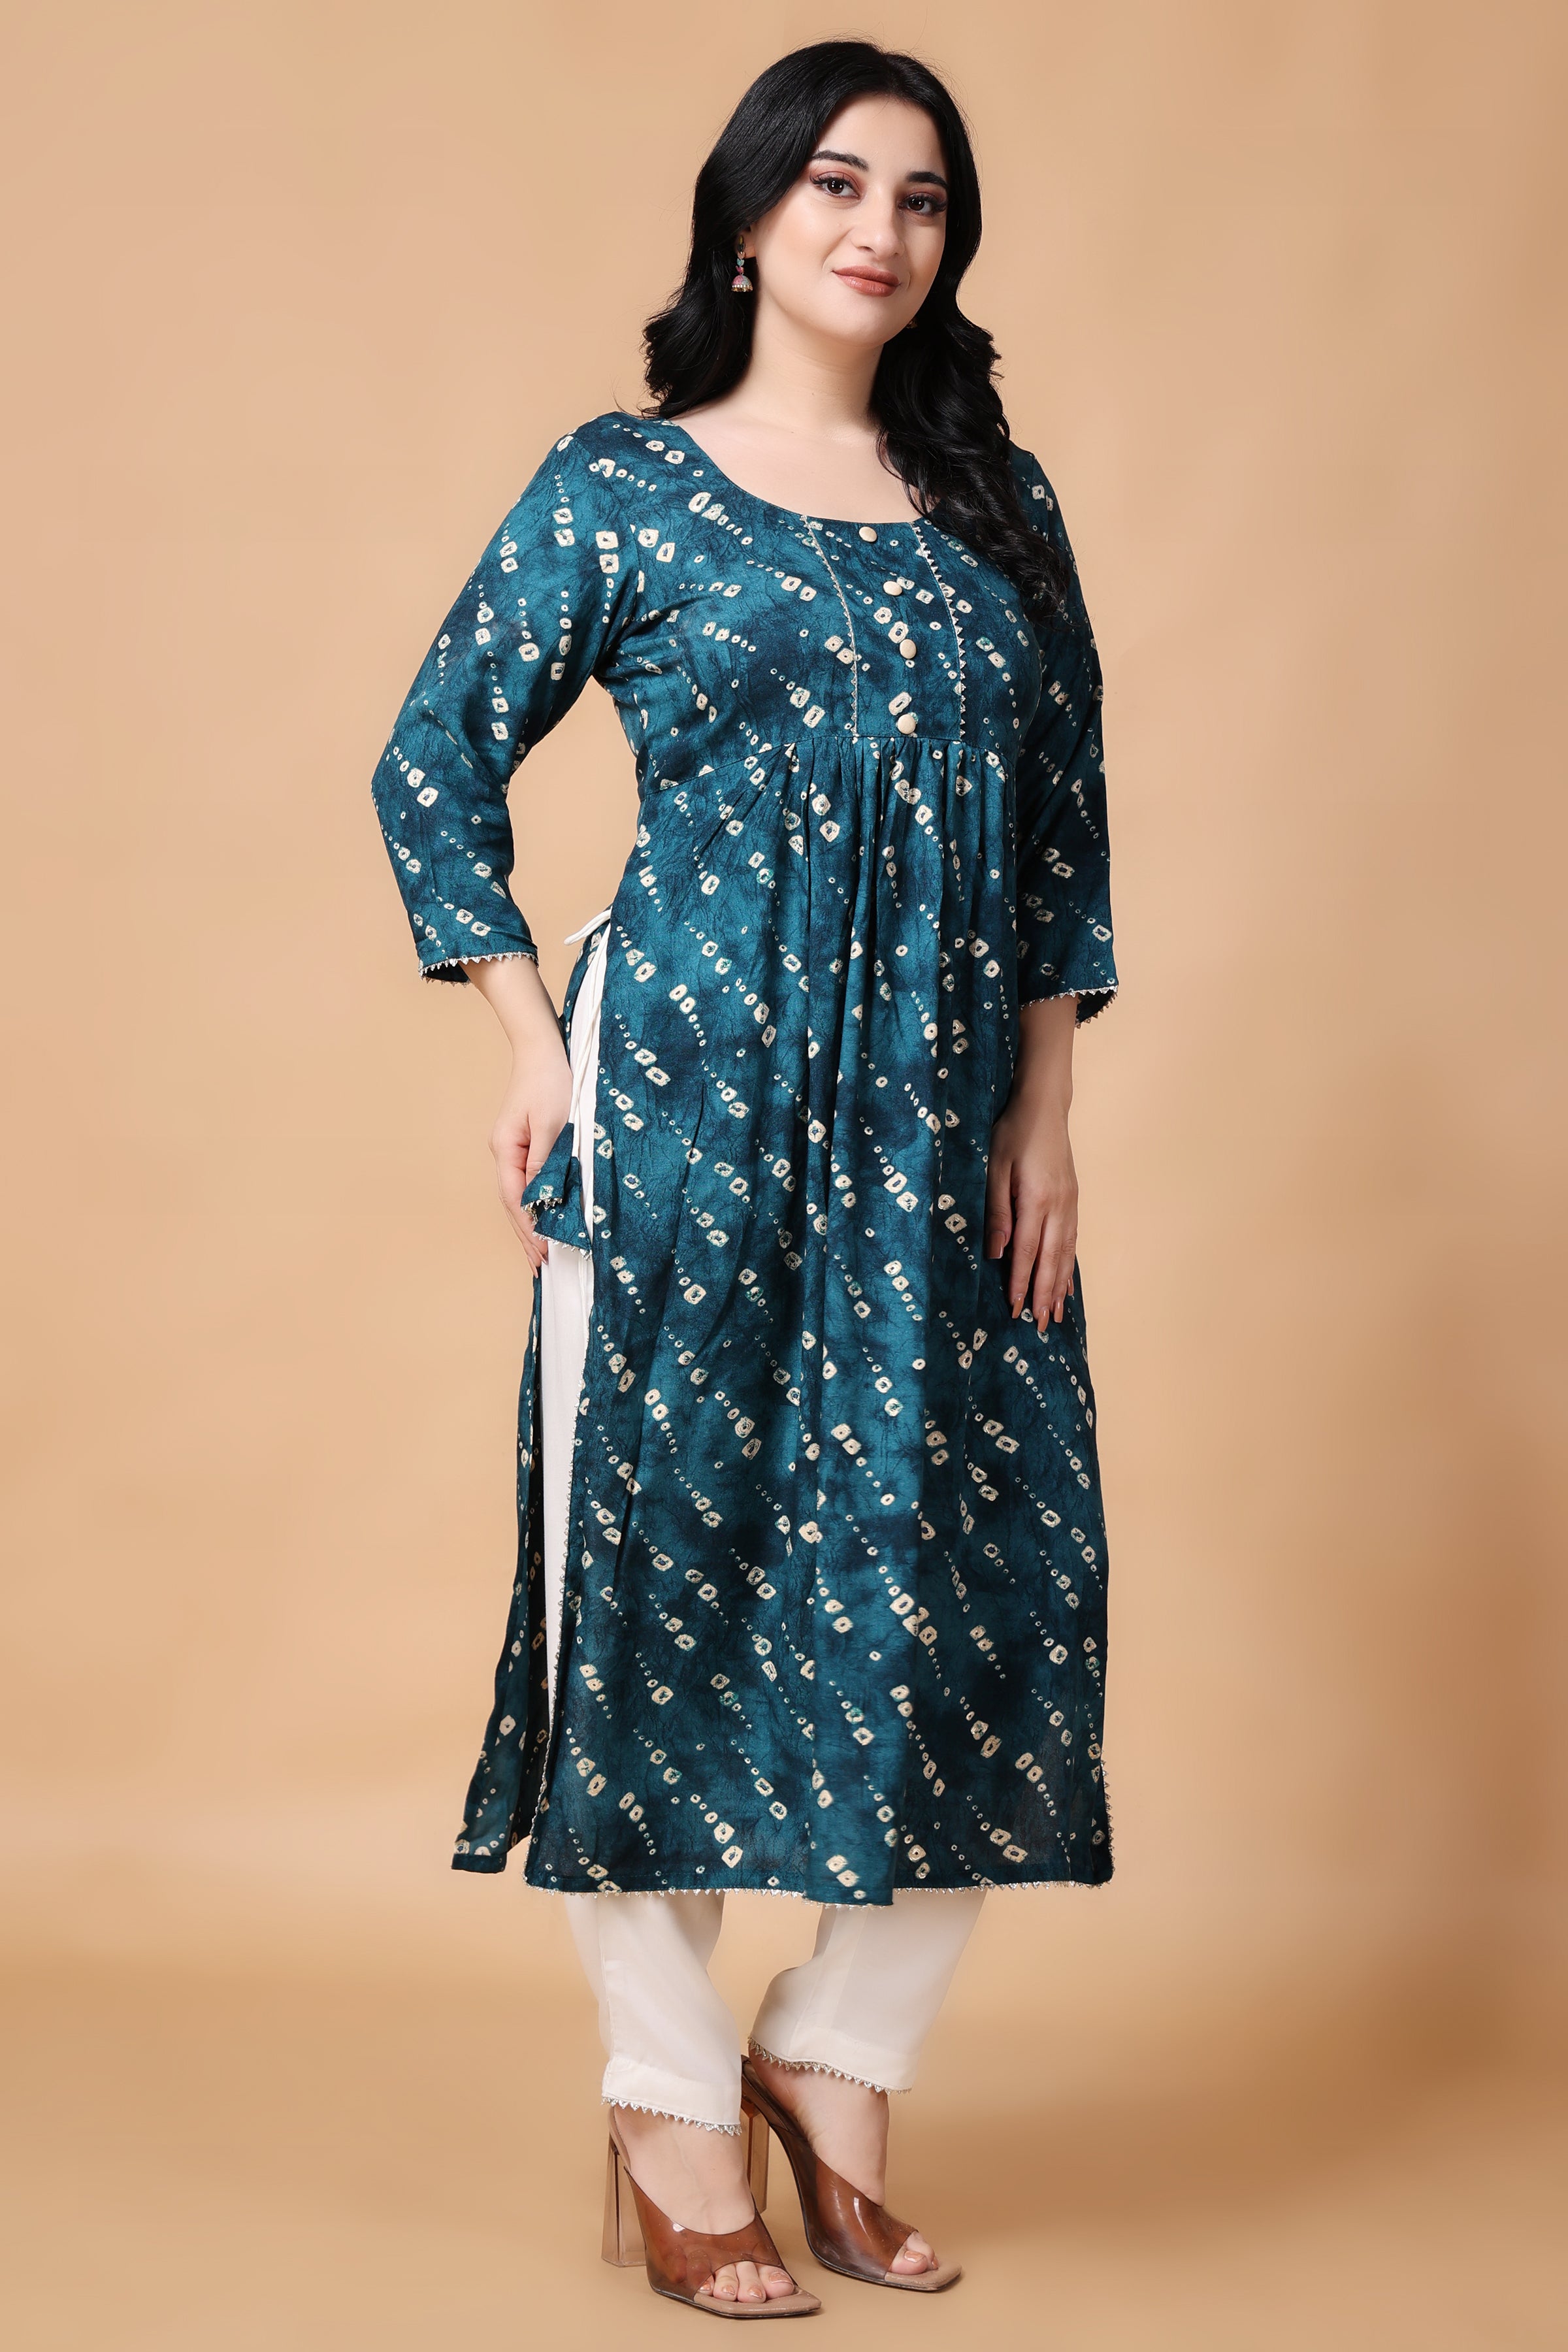 25 Types Of Kurtis For Various Body Types & Products To Buy | LBB